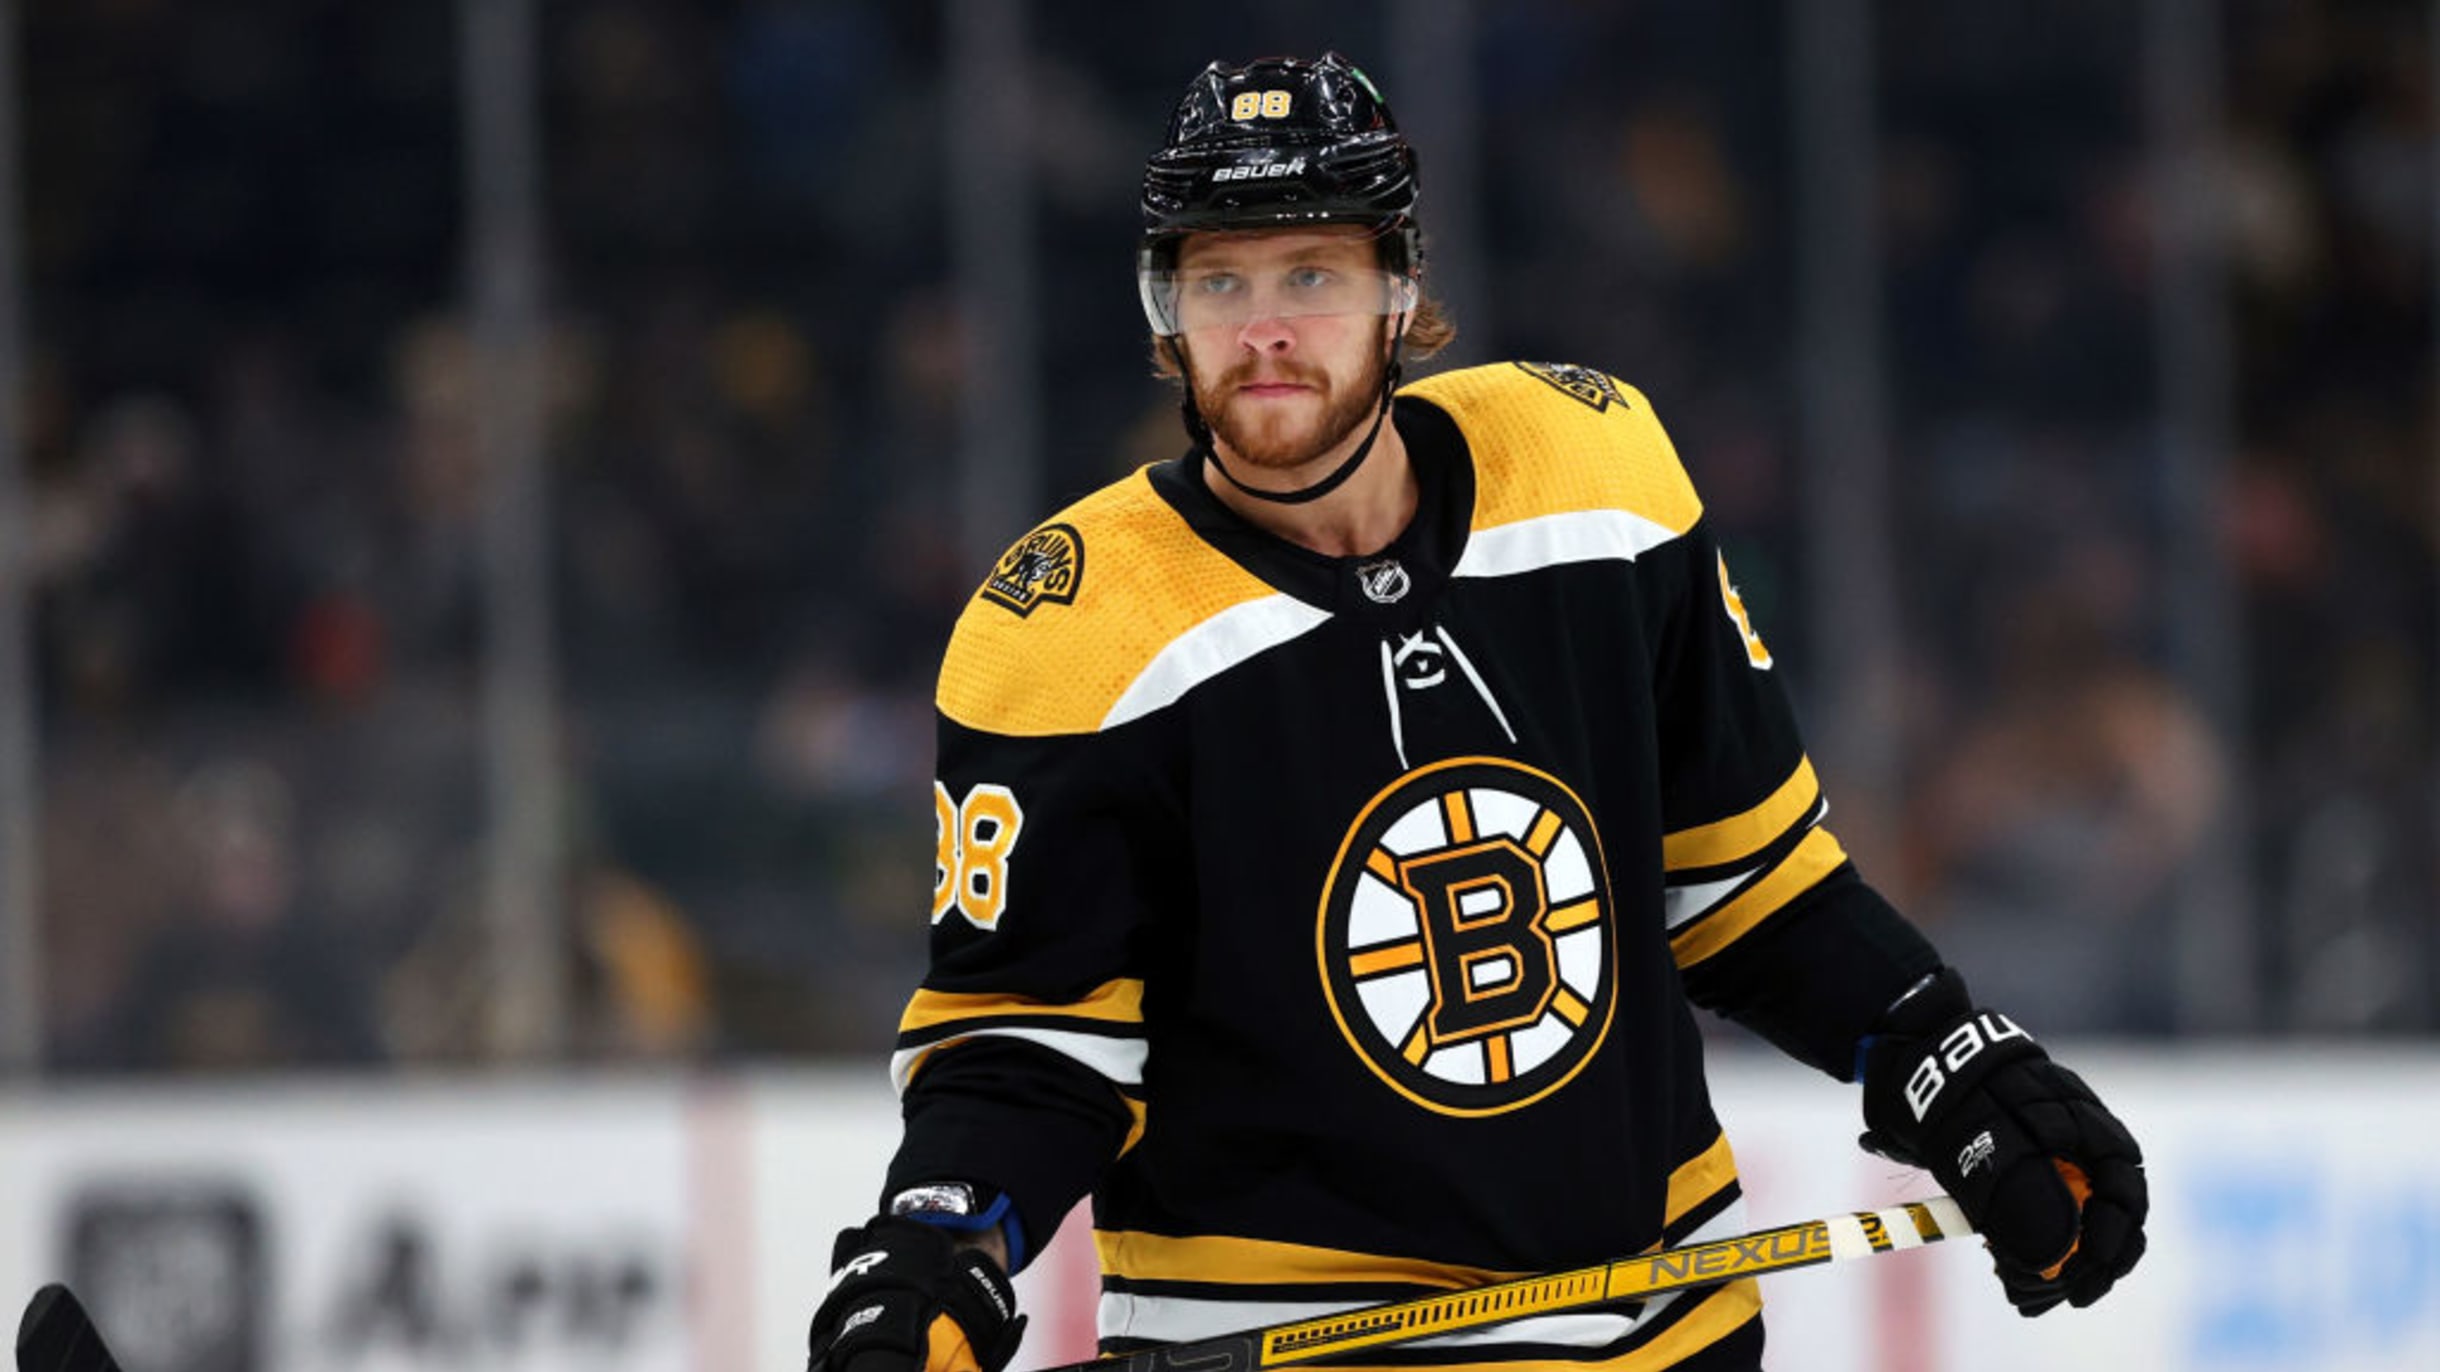 Bruins David Pastrnak coming into his own as an NHL superstar